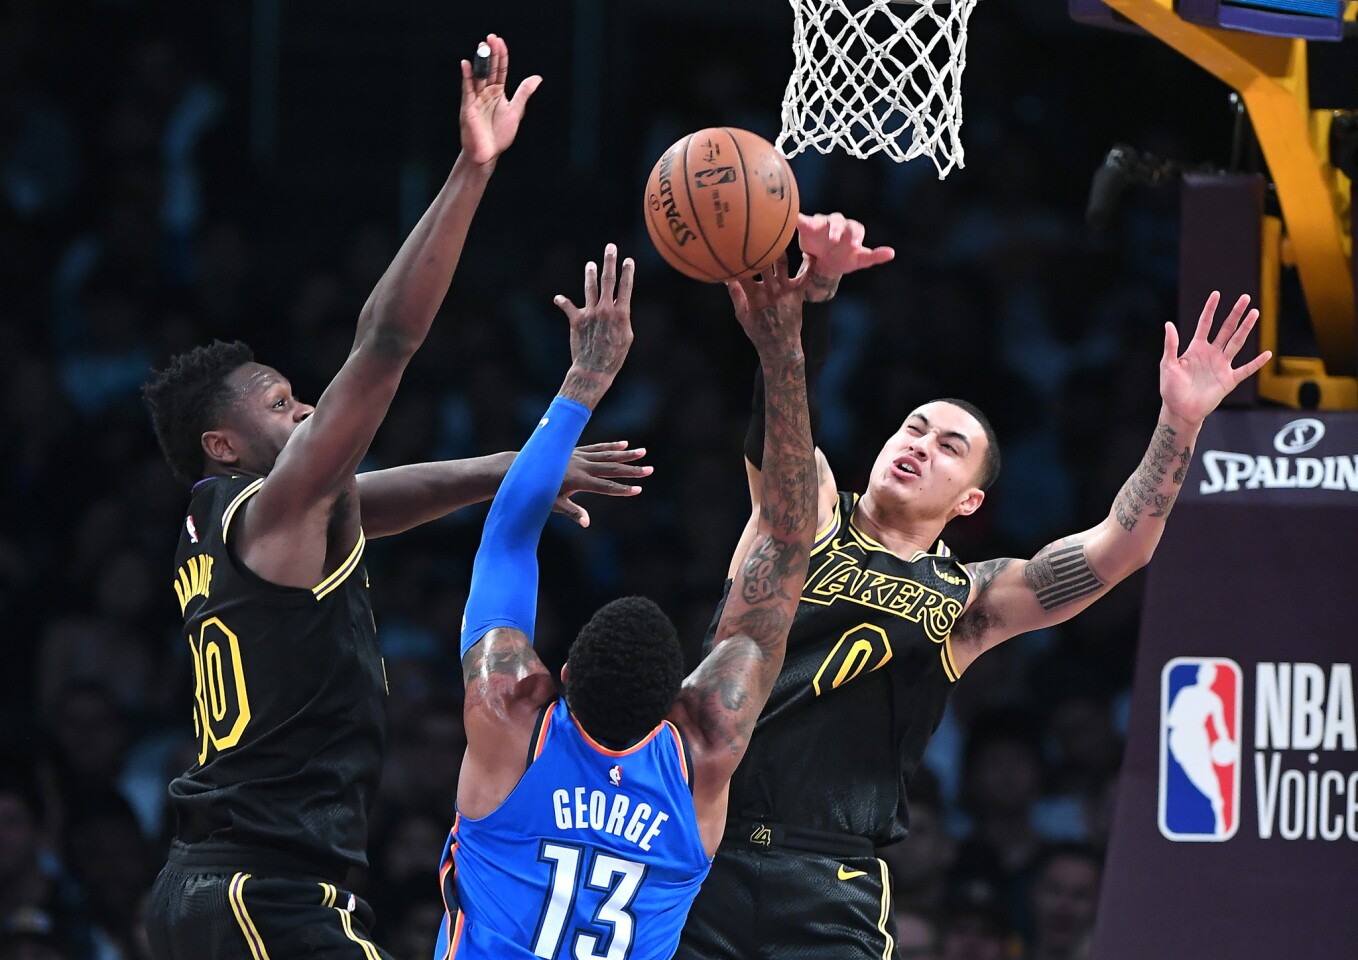 Lakers forward Kyle Kuzma, right, blocks a shot from Thunder forward Paul George as Julius Randle helps on defense during a game Thursday at Staples Center.